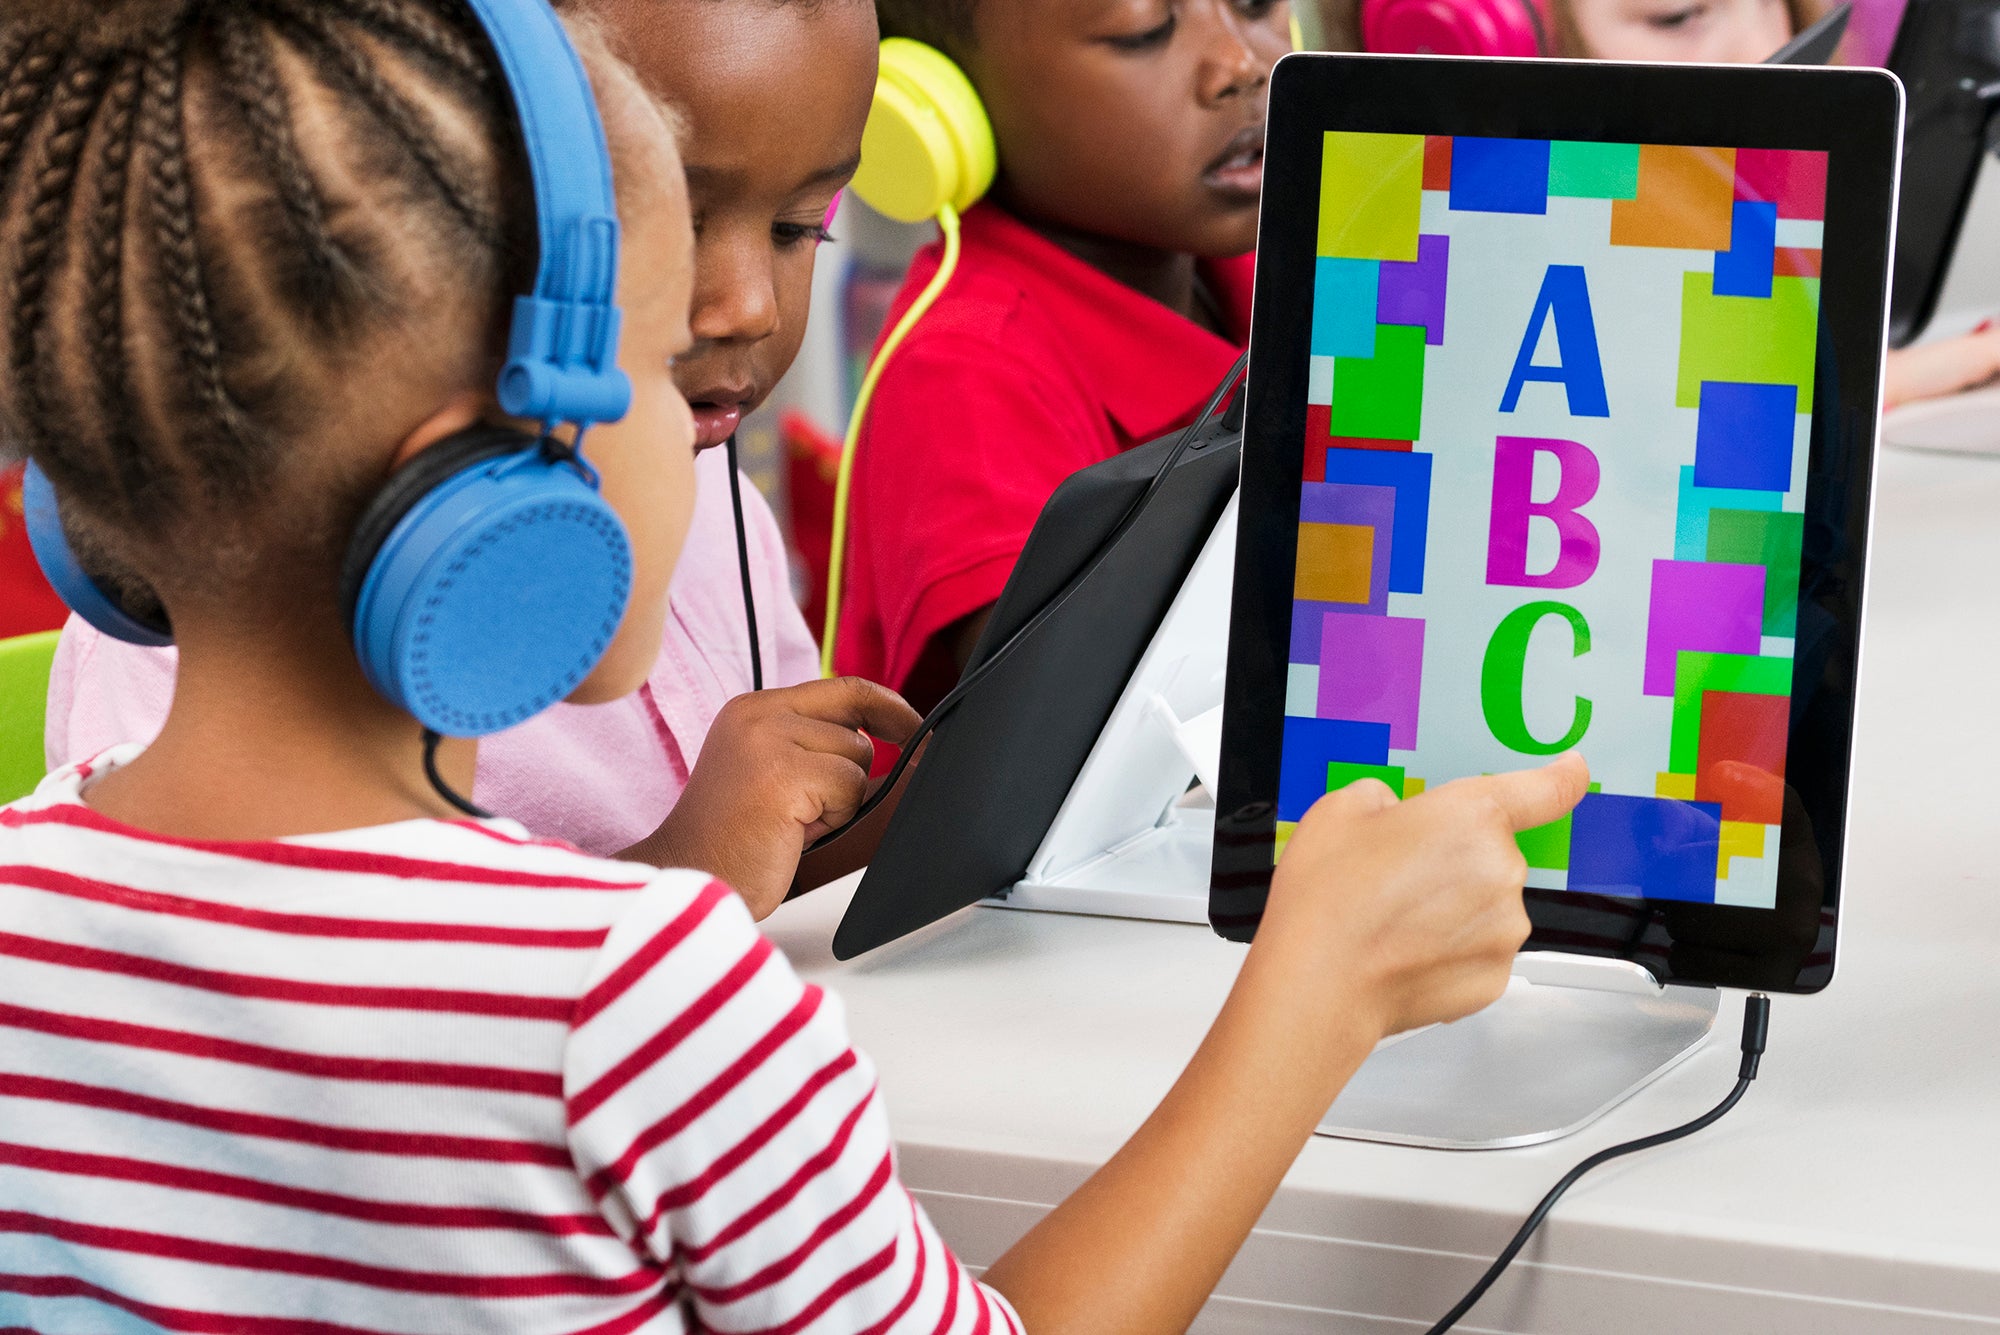 Black Children Who Speak African American English Are Routinely Misdiagnosed with Speech Disorders